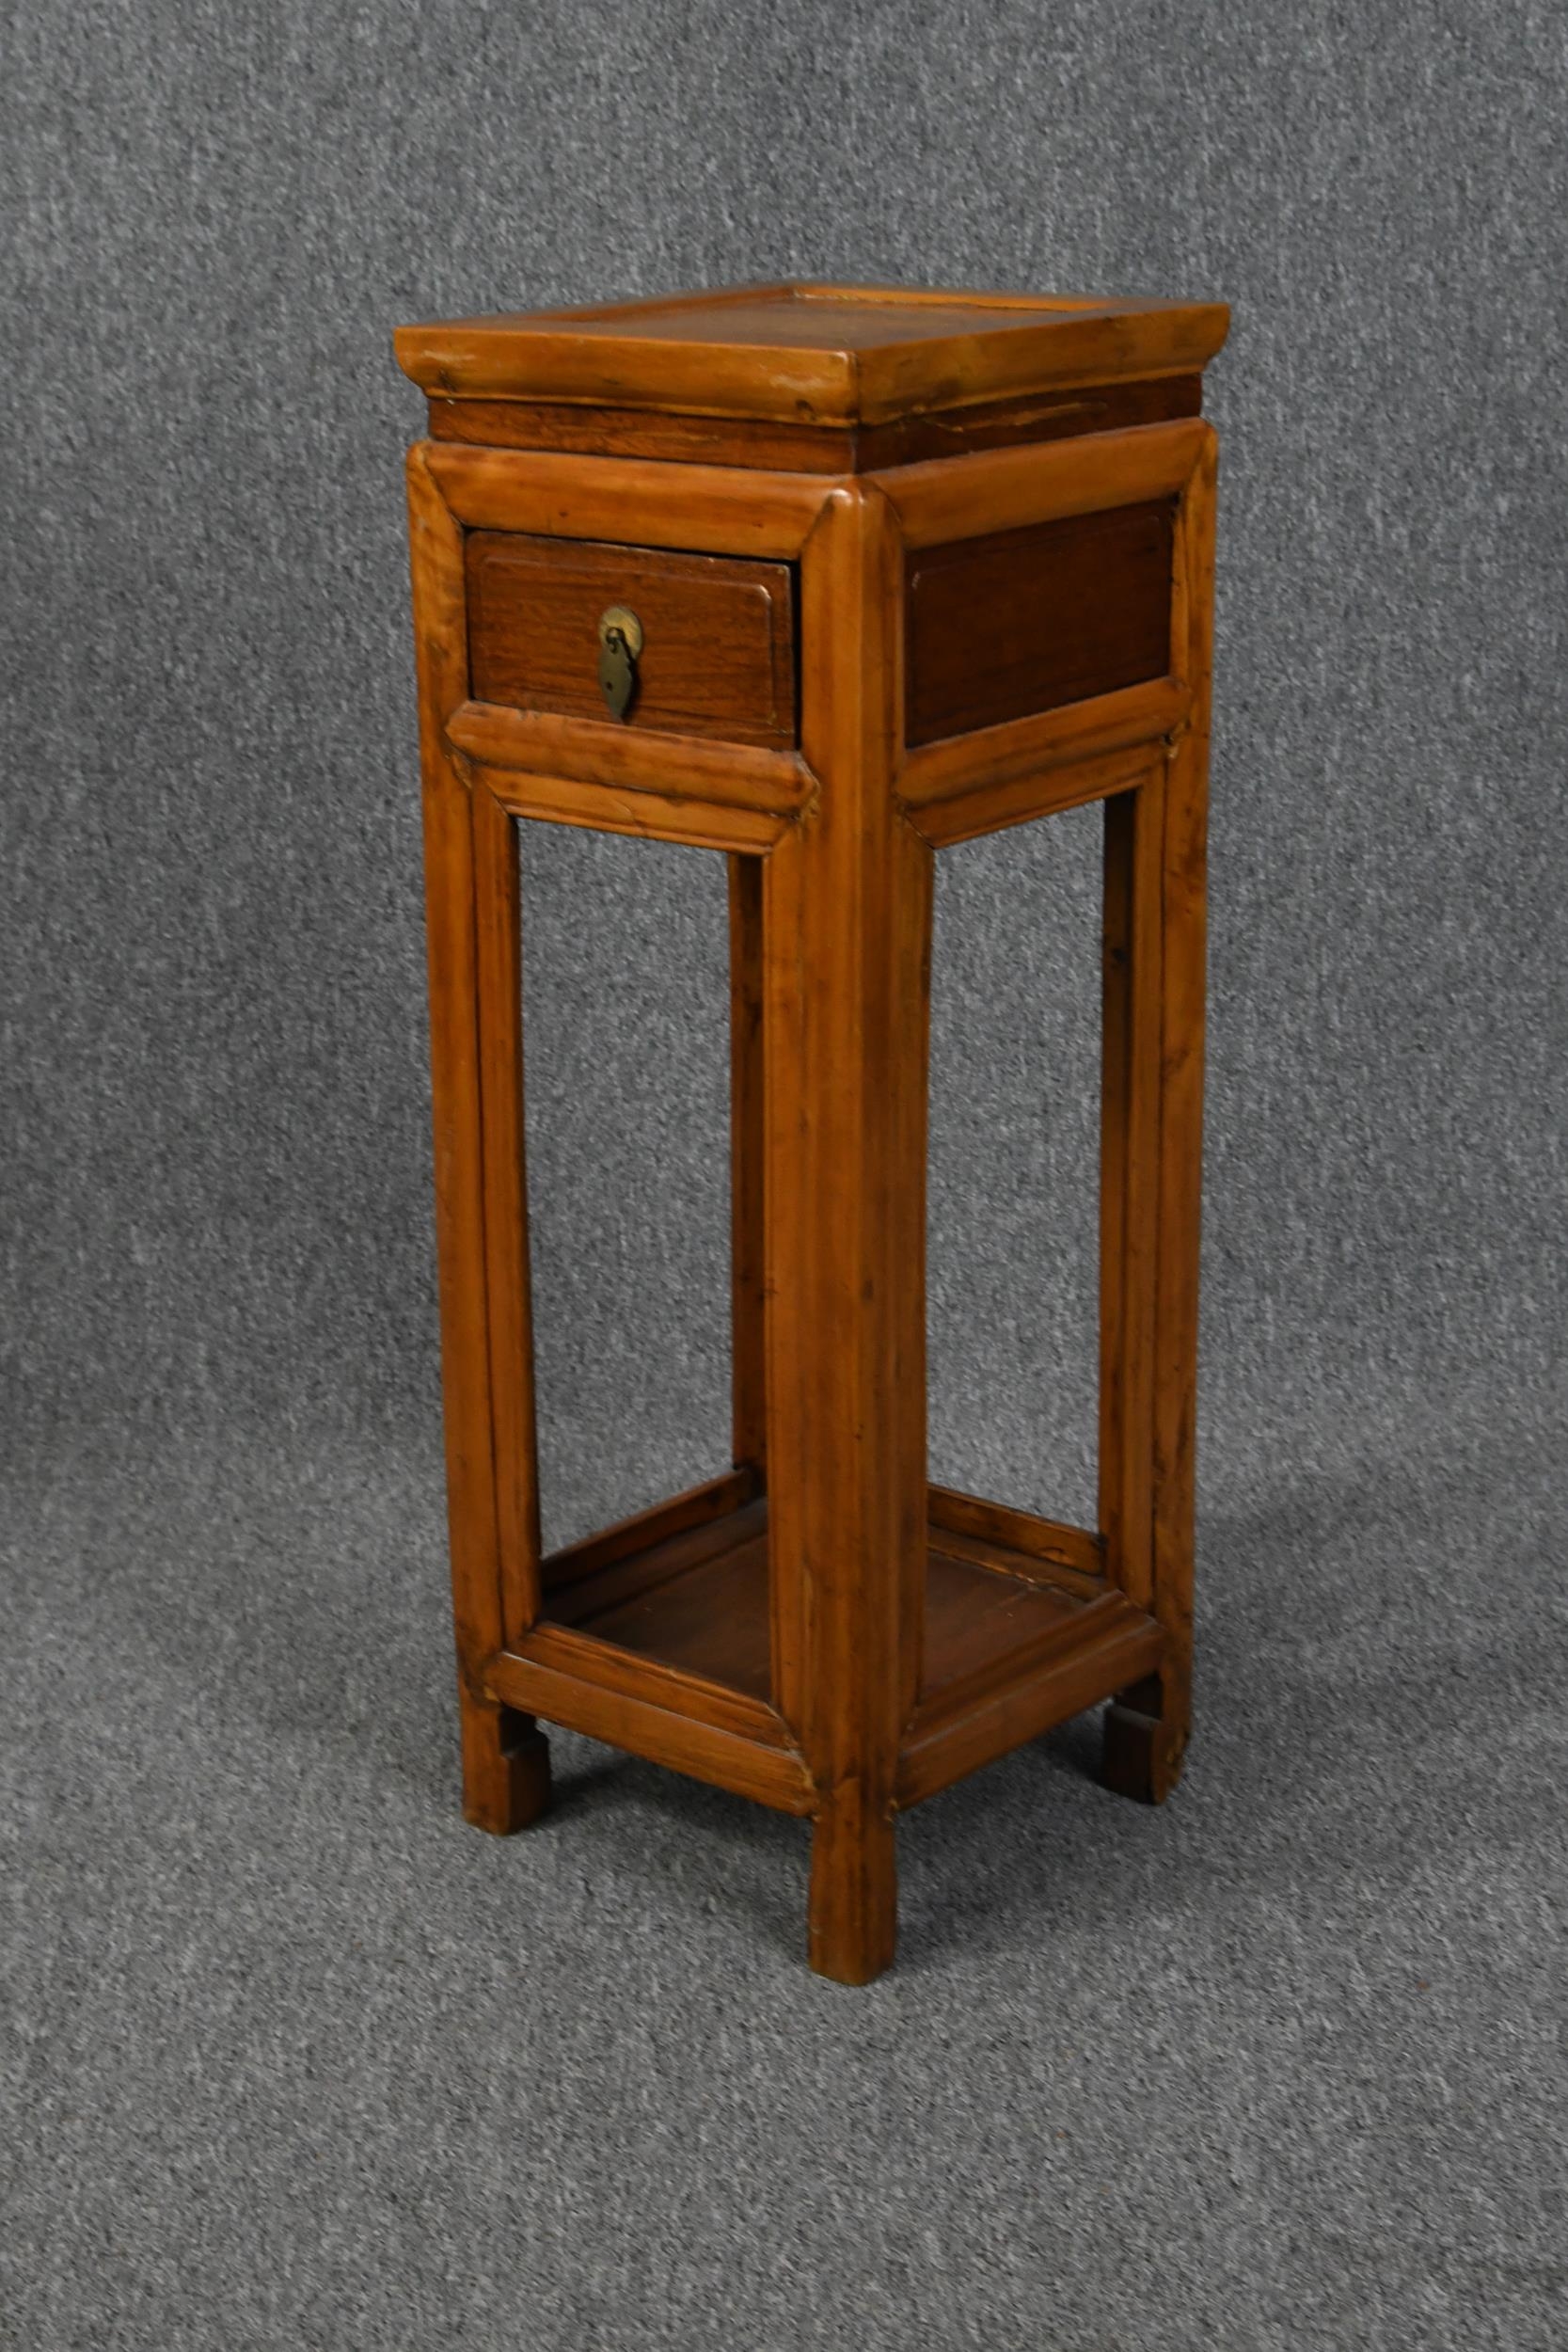 Urn stand, Chinese hardwood. H.89cm W.31cm - Image 3 of 3